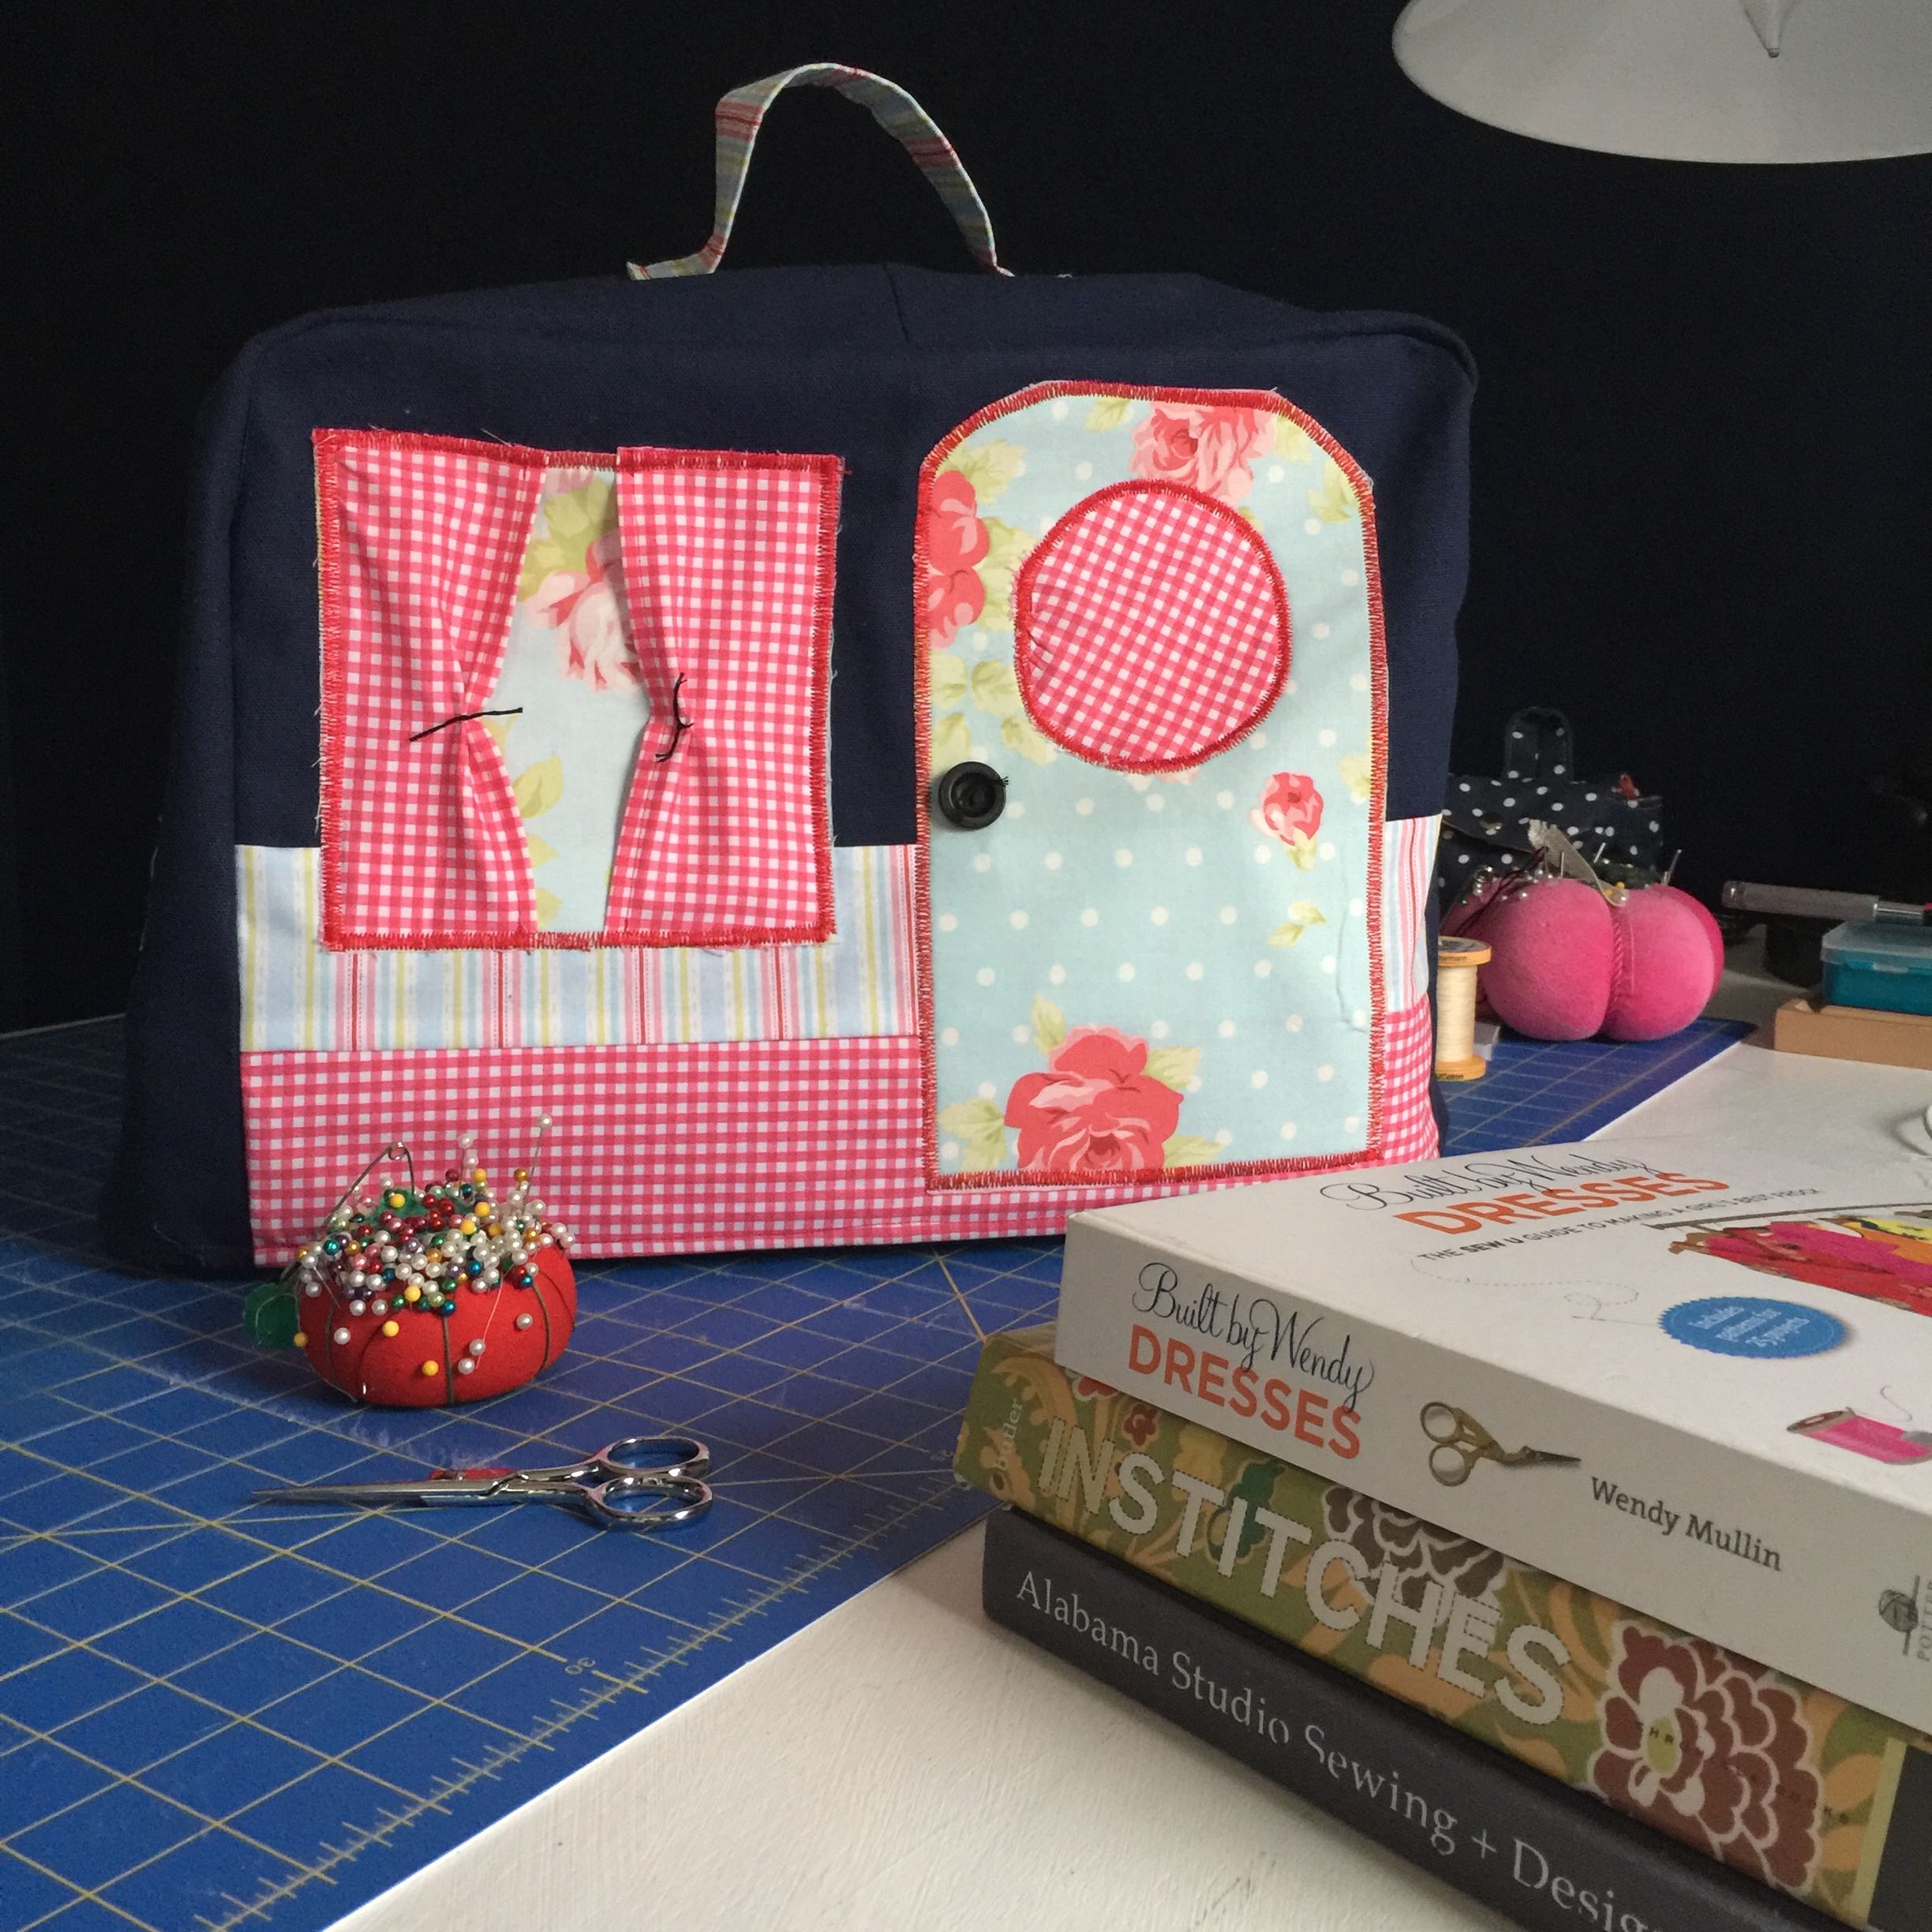 How to sew a sewing machine cover